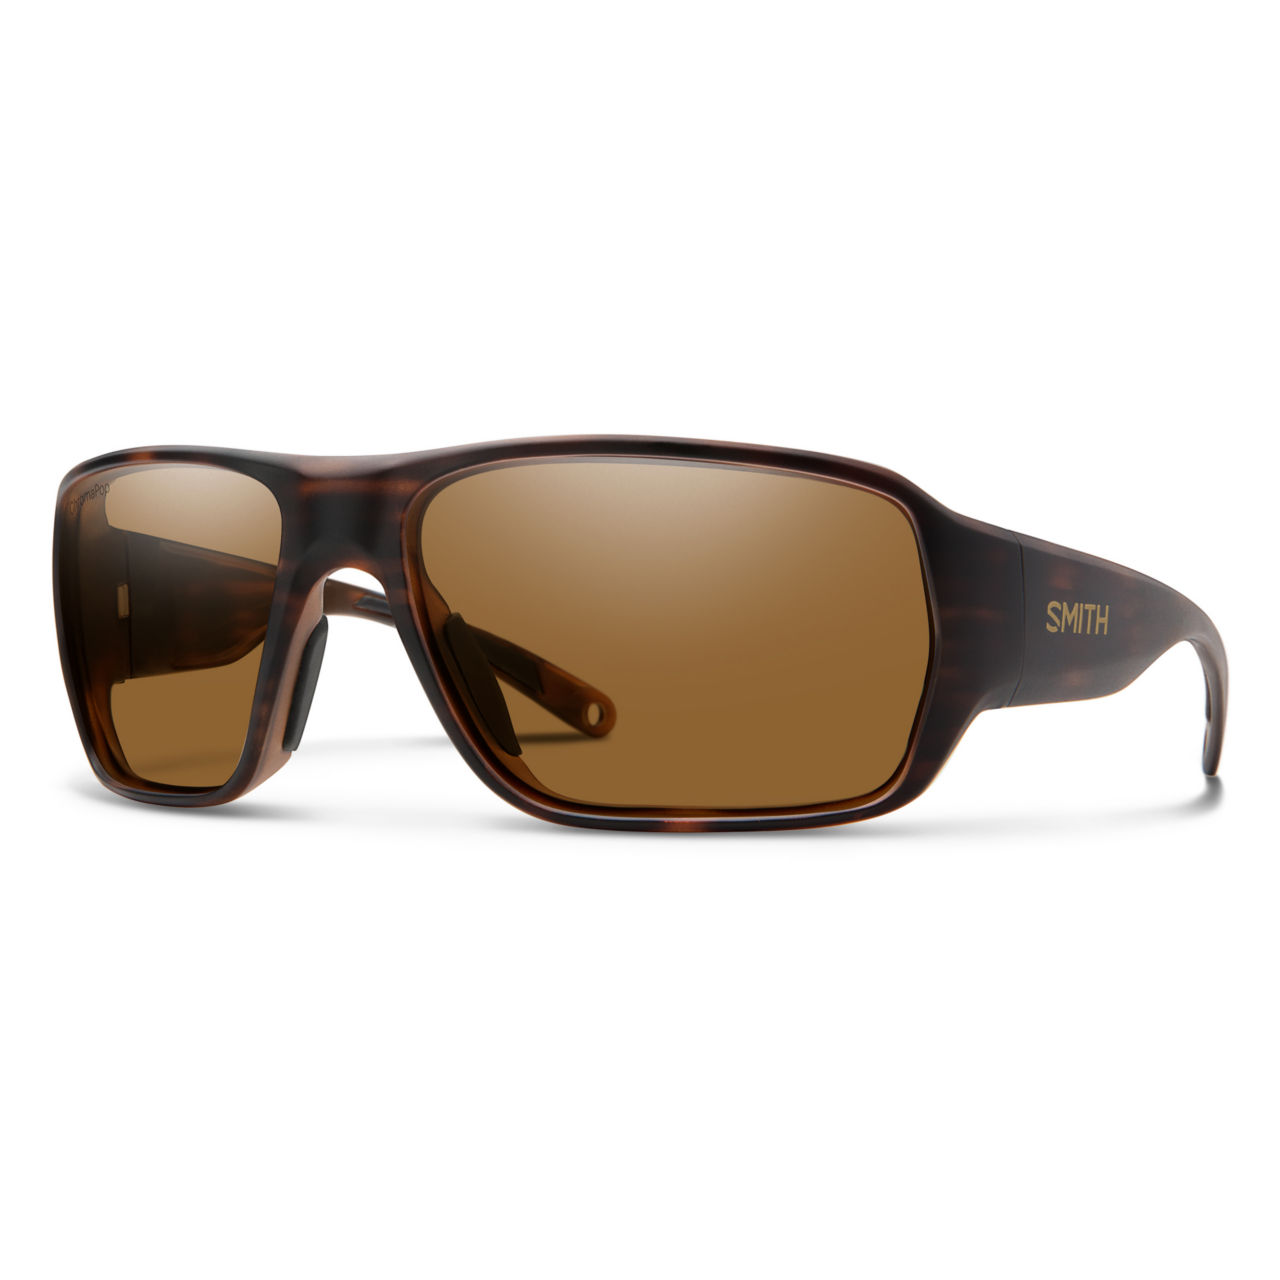 Smith Castaway Sunglasses -  image number 0